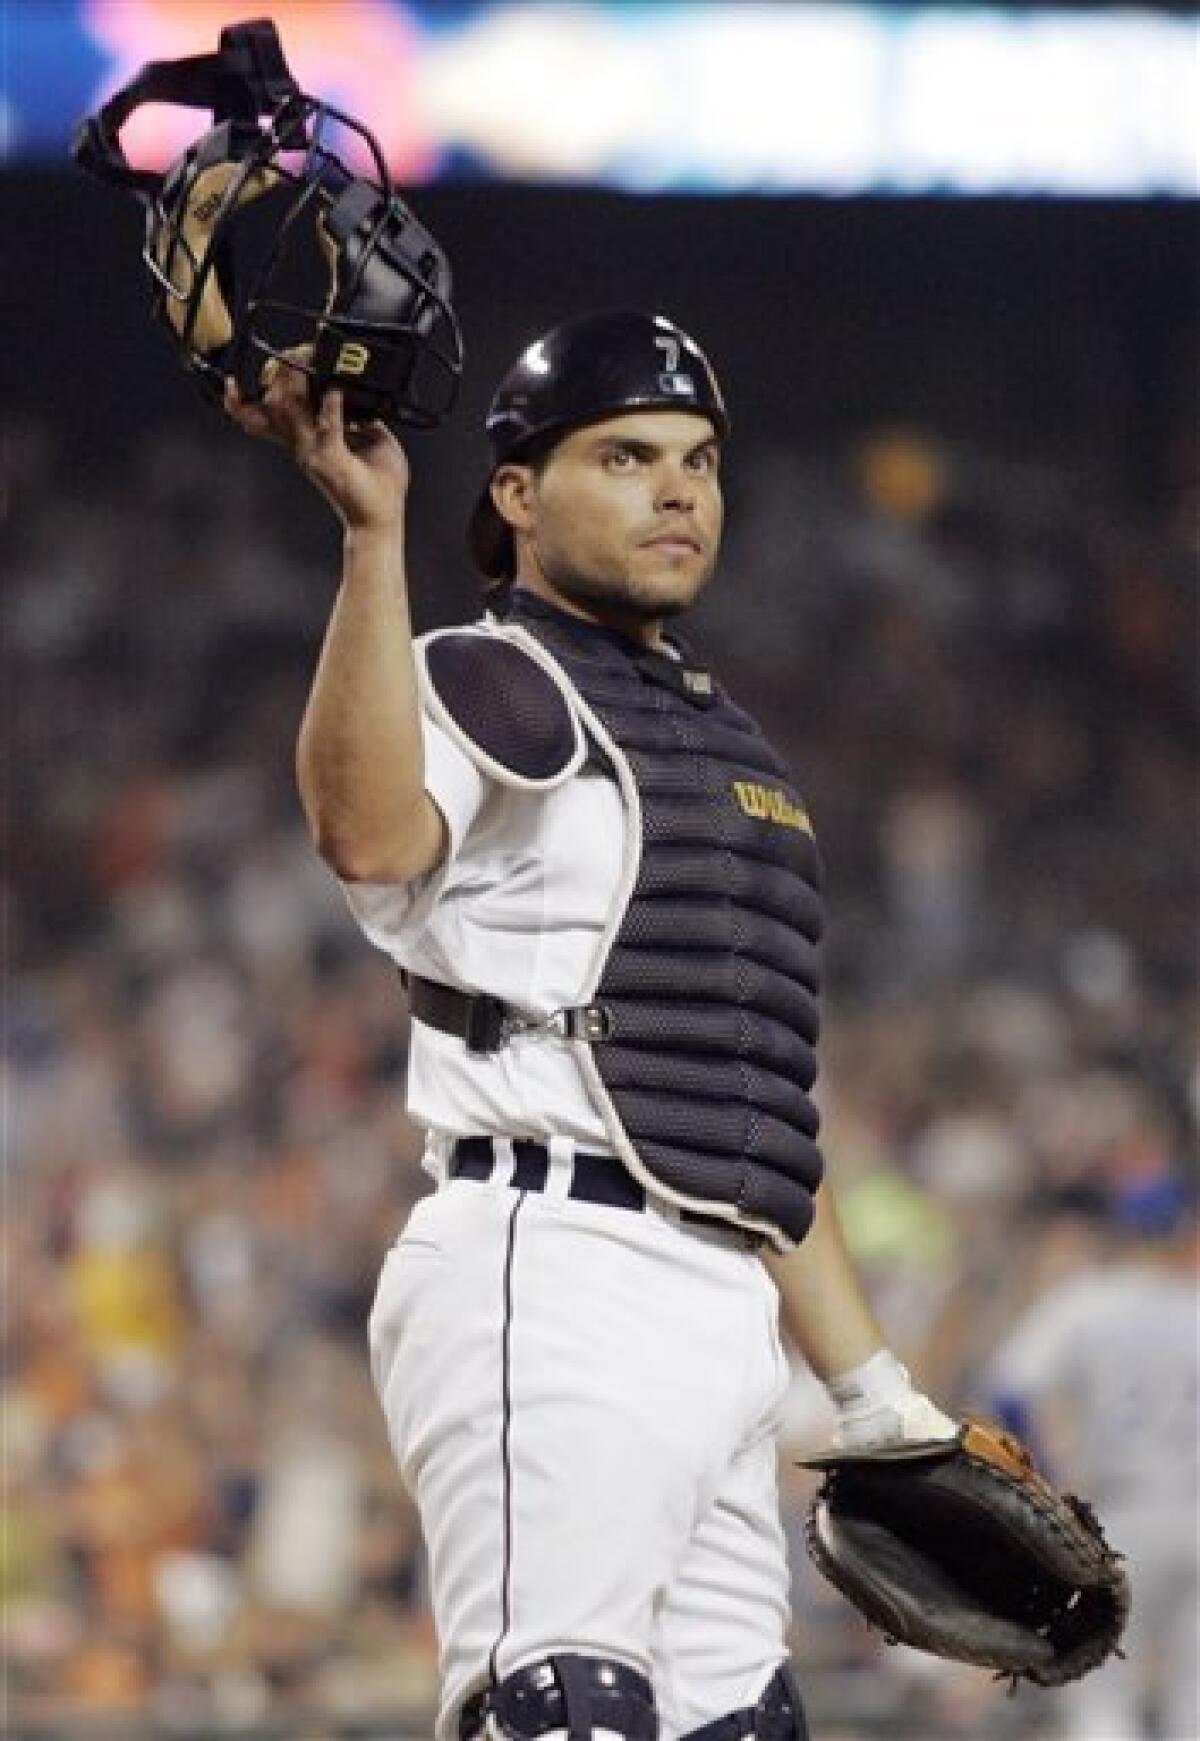 Tigers trade Rodriguez to Yankees - The San Diego Union-Tribune